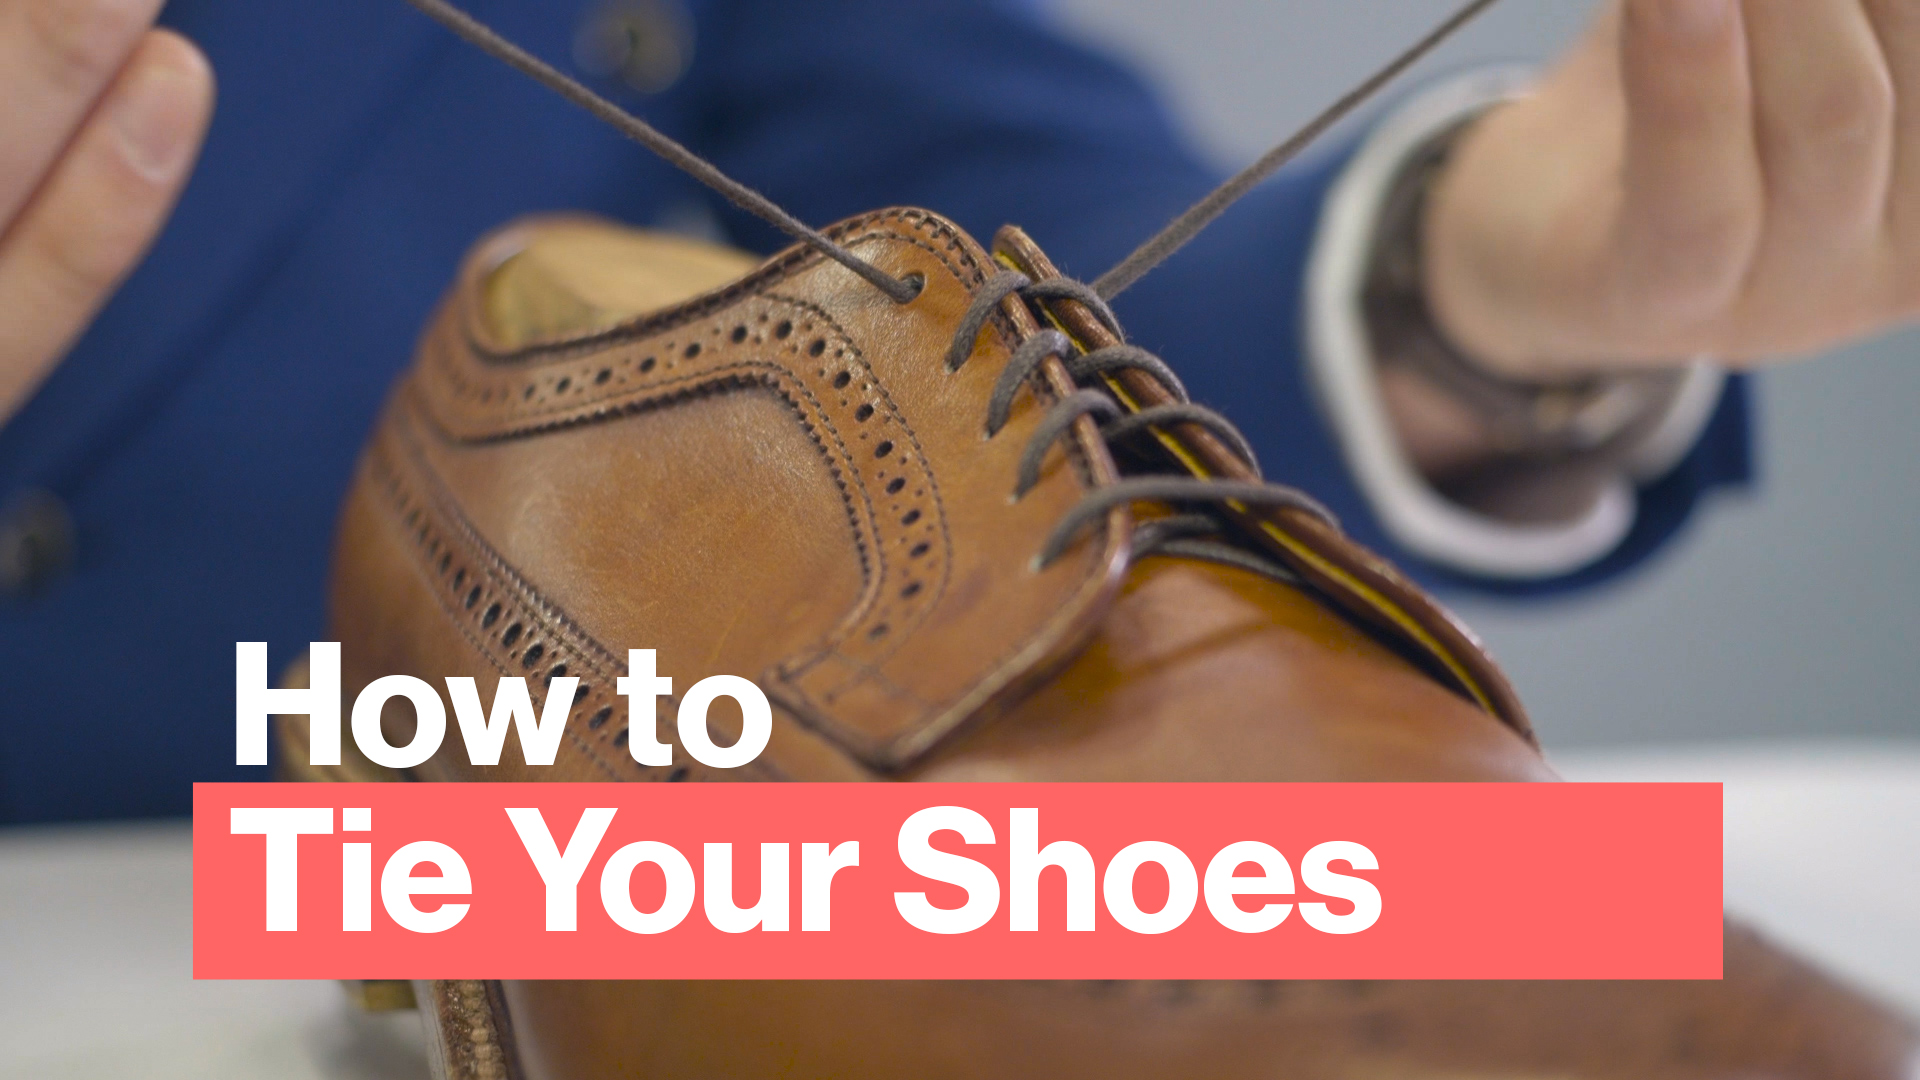 How to Tie Your Shoes and Lace Your Shoes the Best Way - Bloomberg